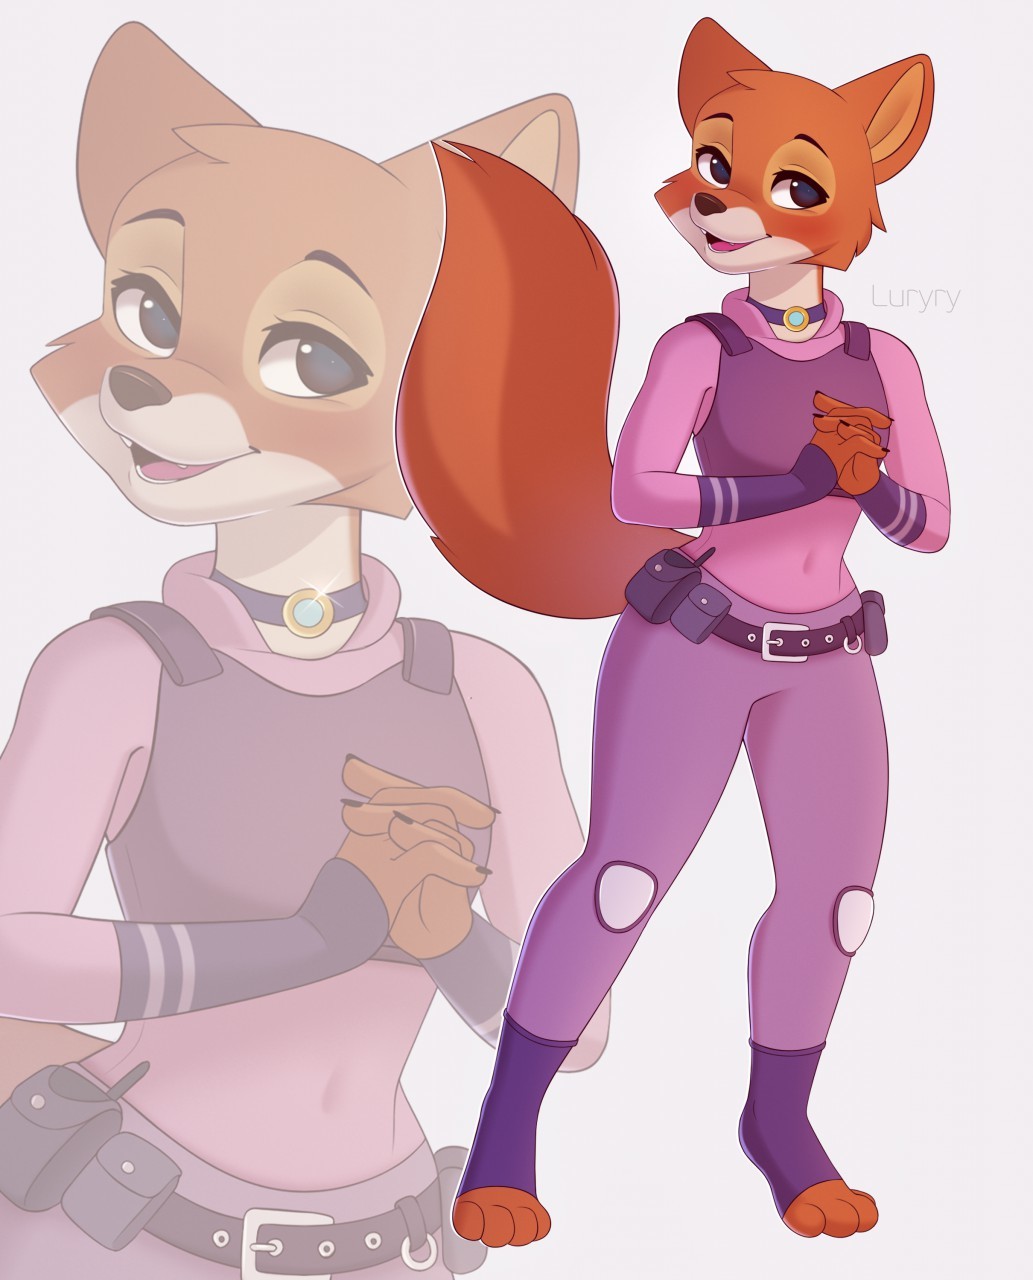 New police officer - Zootopia, Virgin Marian, Crossover, Robin the Hood, Zpd, Art, Furry, Anthro